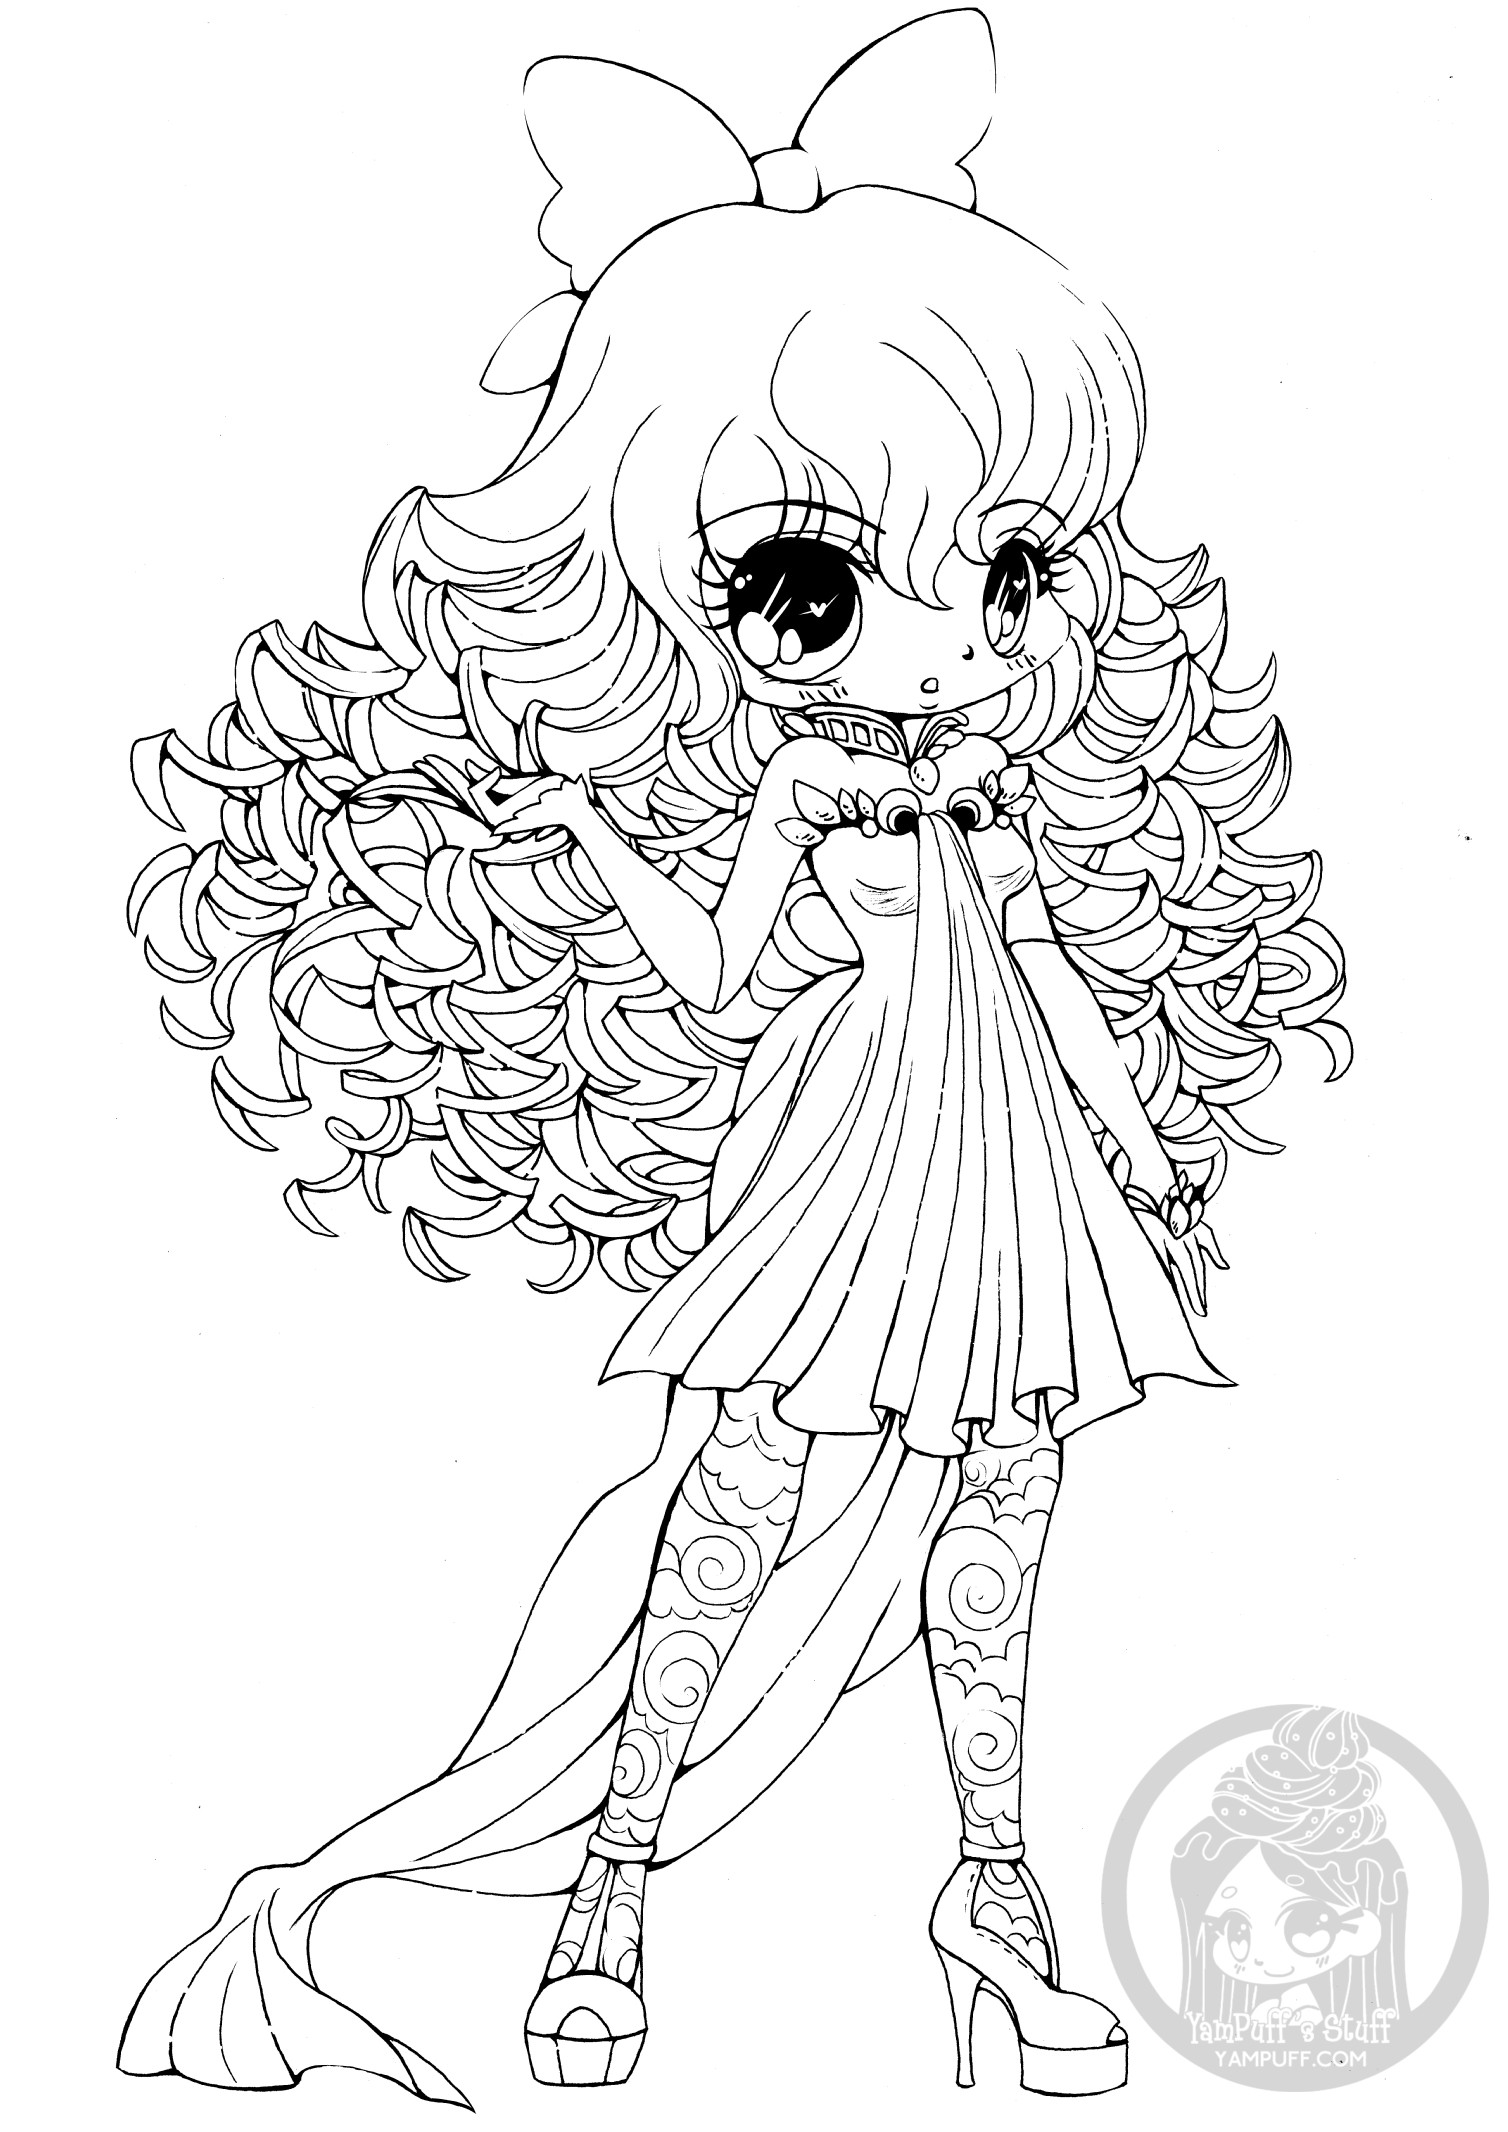 The Best Ideas for Chibi Girls Coloring Pages – Home, Family, Style and ...